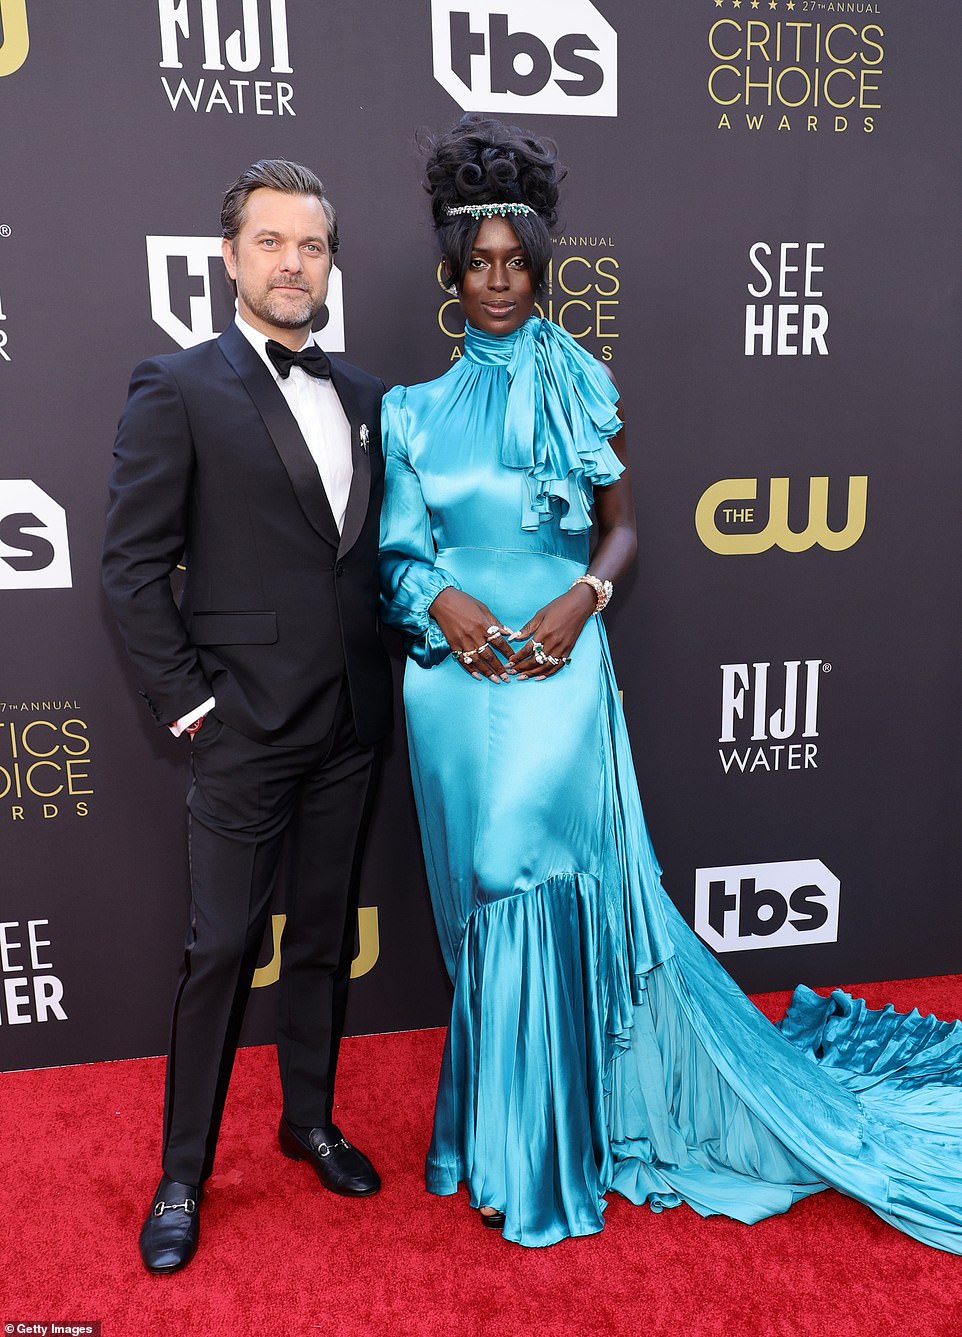 Date Tonight: Joshua Jackson kicked off the red carpet with wife Jodi Turner Smith, who rocked a blue dress with a diamond hair accessory on Sunday in Los Angeles.